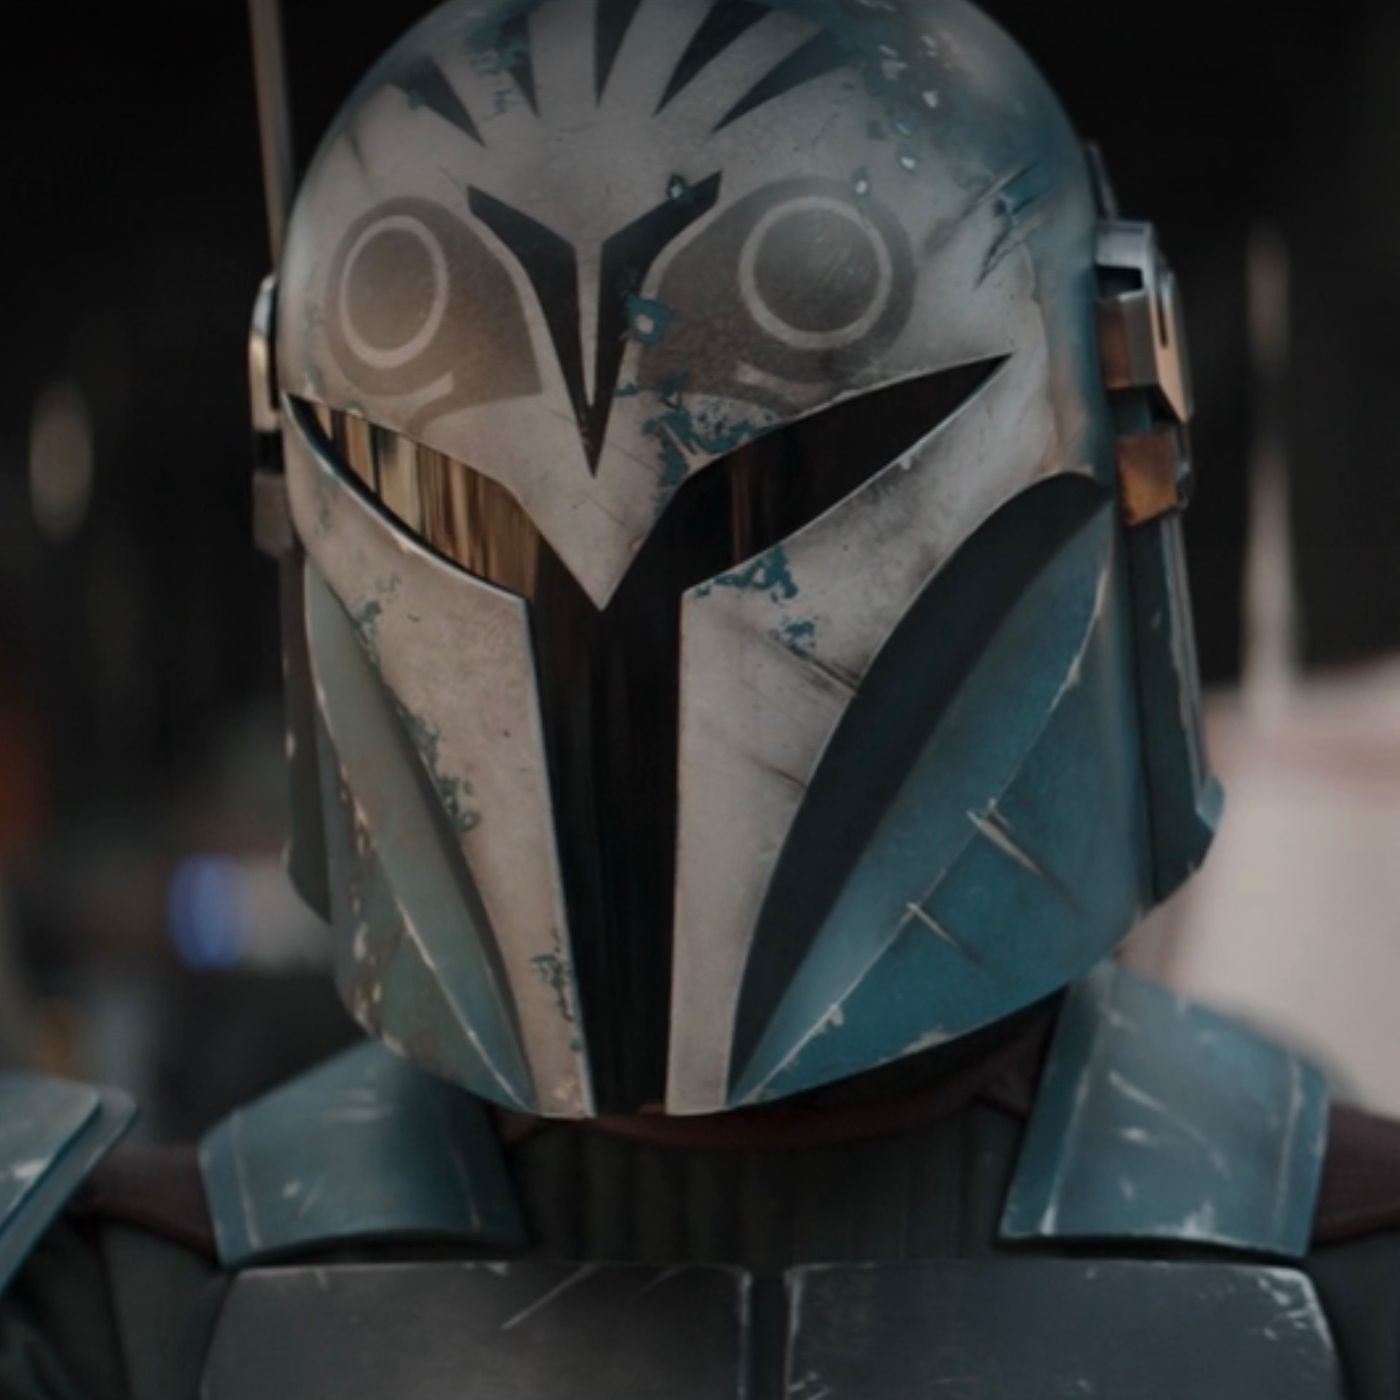 The Mandalorian season 3 episodes, ranked from worst to best